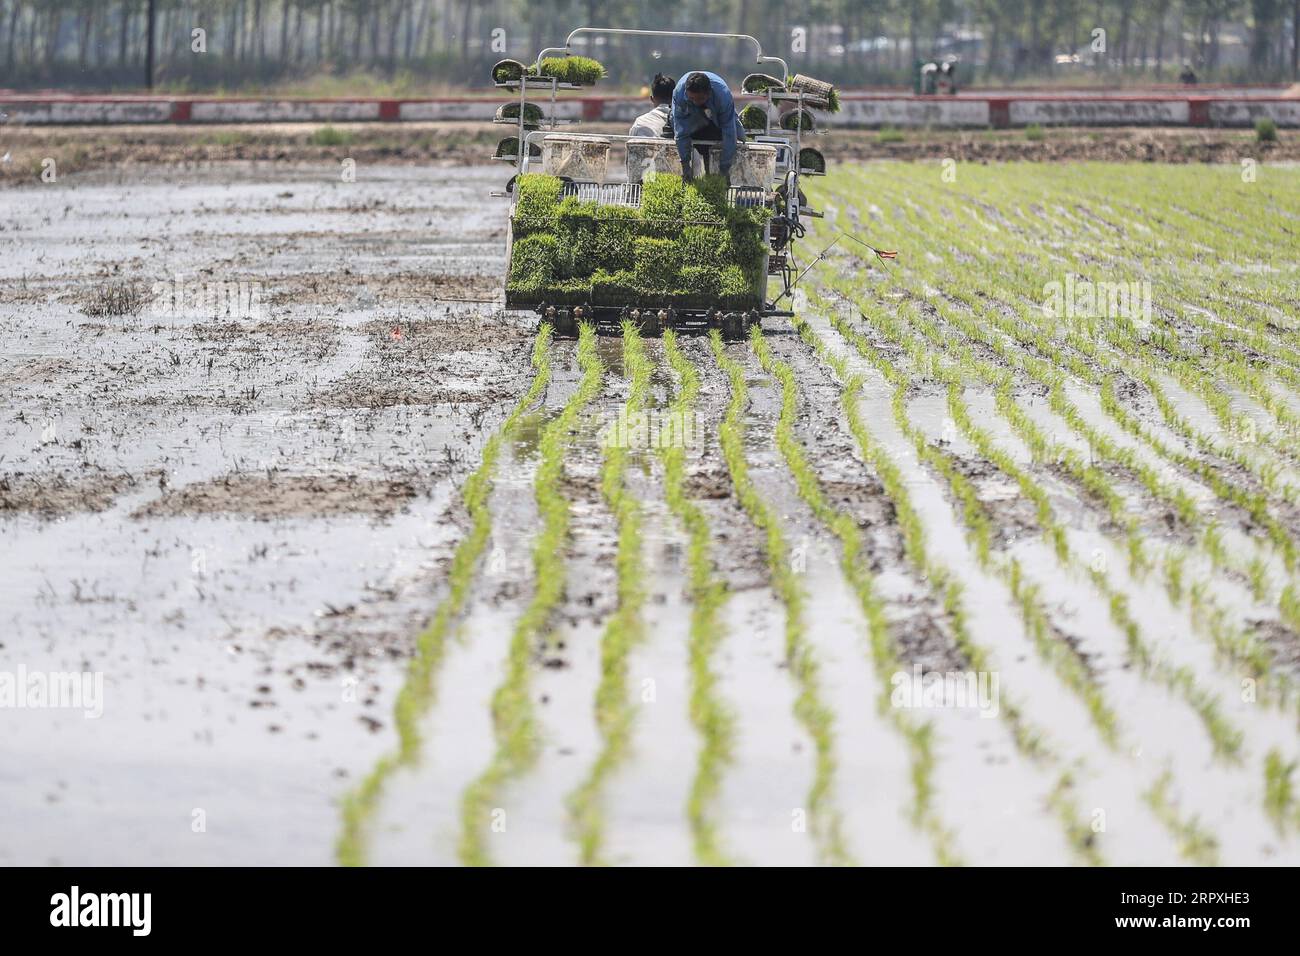 200524 -- PANJIN, May 24, 2020 -- Farmers drive a rice transplanter to plant rice seedlings in Dawa District in Panjin City, northeast China s Liaoning Province, May 24, 2020. Rice transplanting of over 1.59 million mu about 106,000 hectares paddy fields in Panjin, the main rice producing area in Liaoning, has started recently.  CHINA-LIAONING-RICE-TRANSPLANTING CN PanxYulong PUBLICATIONxNOTxINxCHN Stock Photo